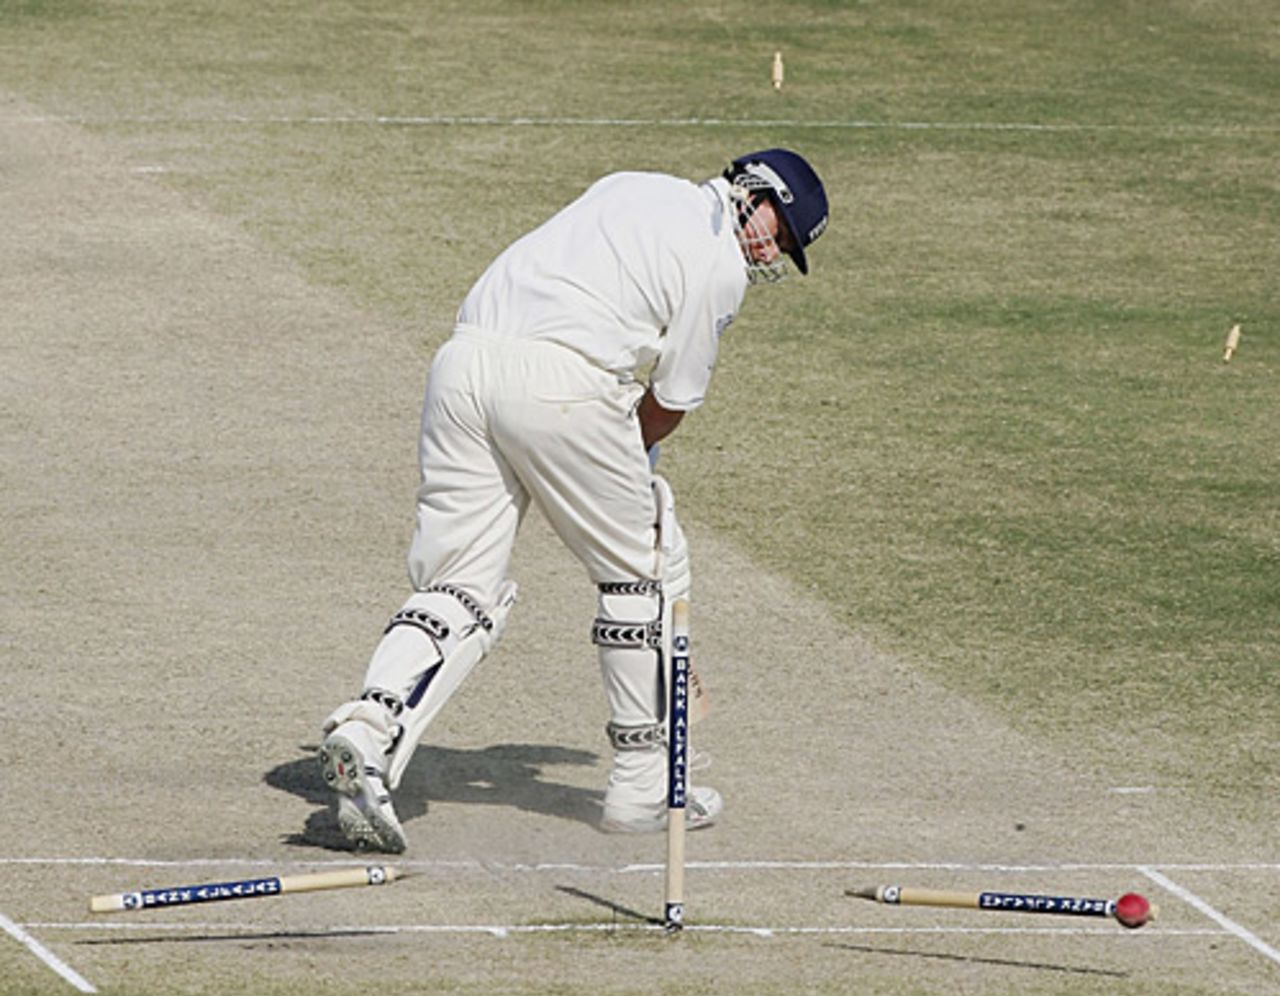 Ashley Giles's stumps are destroyed by a yorker from Shoaib Akhtar as Pakistan close in on victory, Pakistan v England, 1st Test, Multan, November 16, 2005